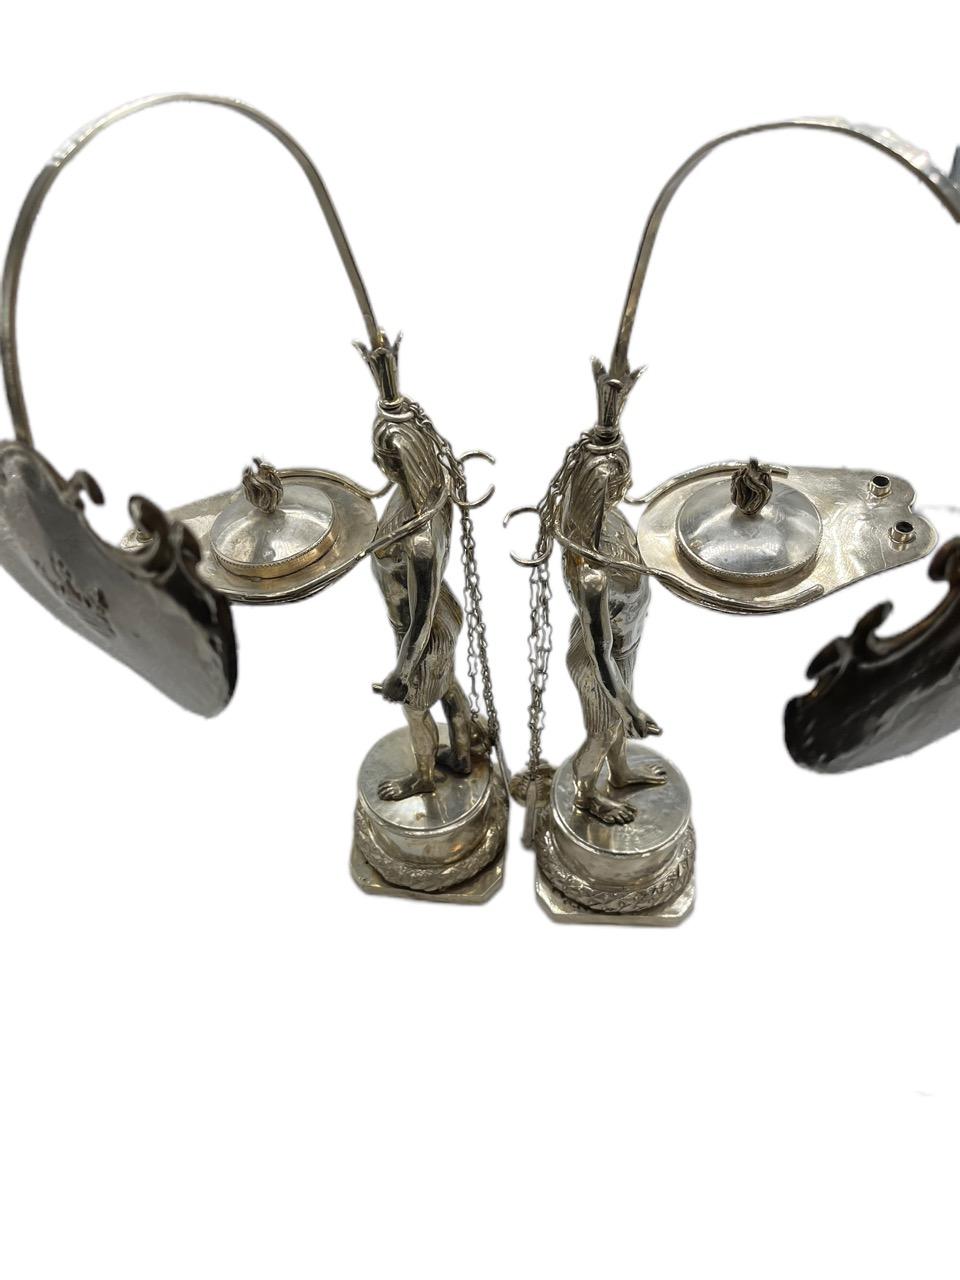 Neoclassical Pair of Early 19th Century Italian Antique Silver Oil Lamps by Vincenzo Belli II